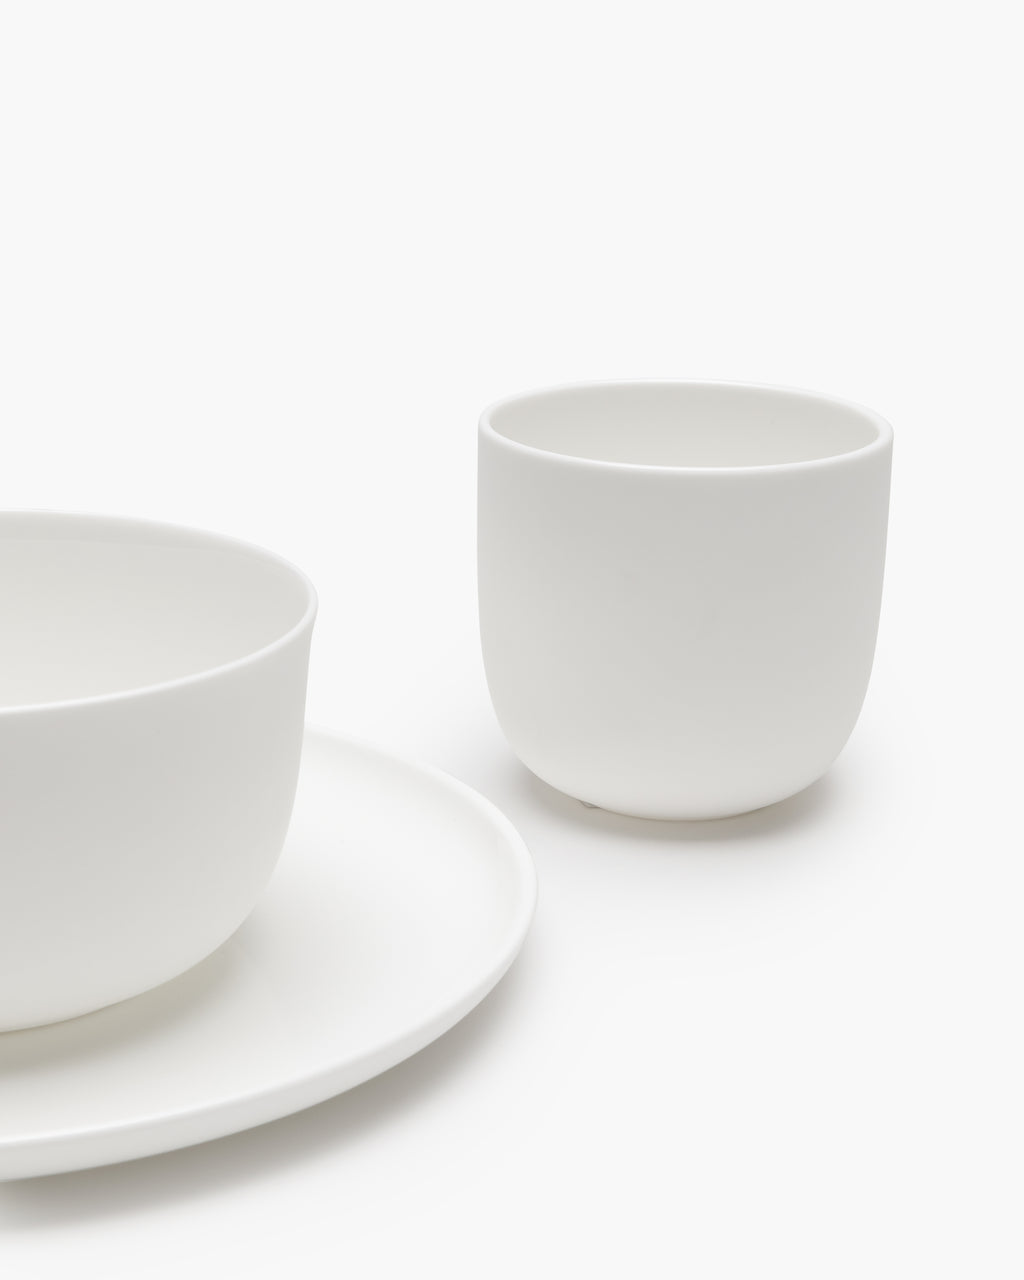 Breakfast 12 pieces - Set Base tableware by Piet Boon - white